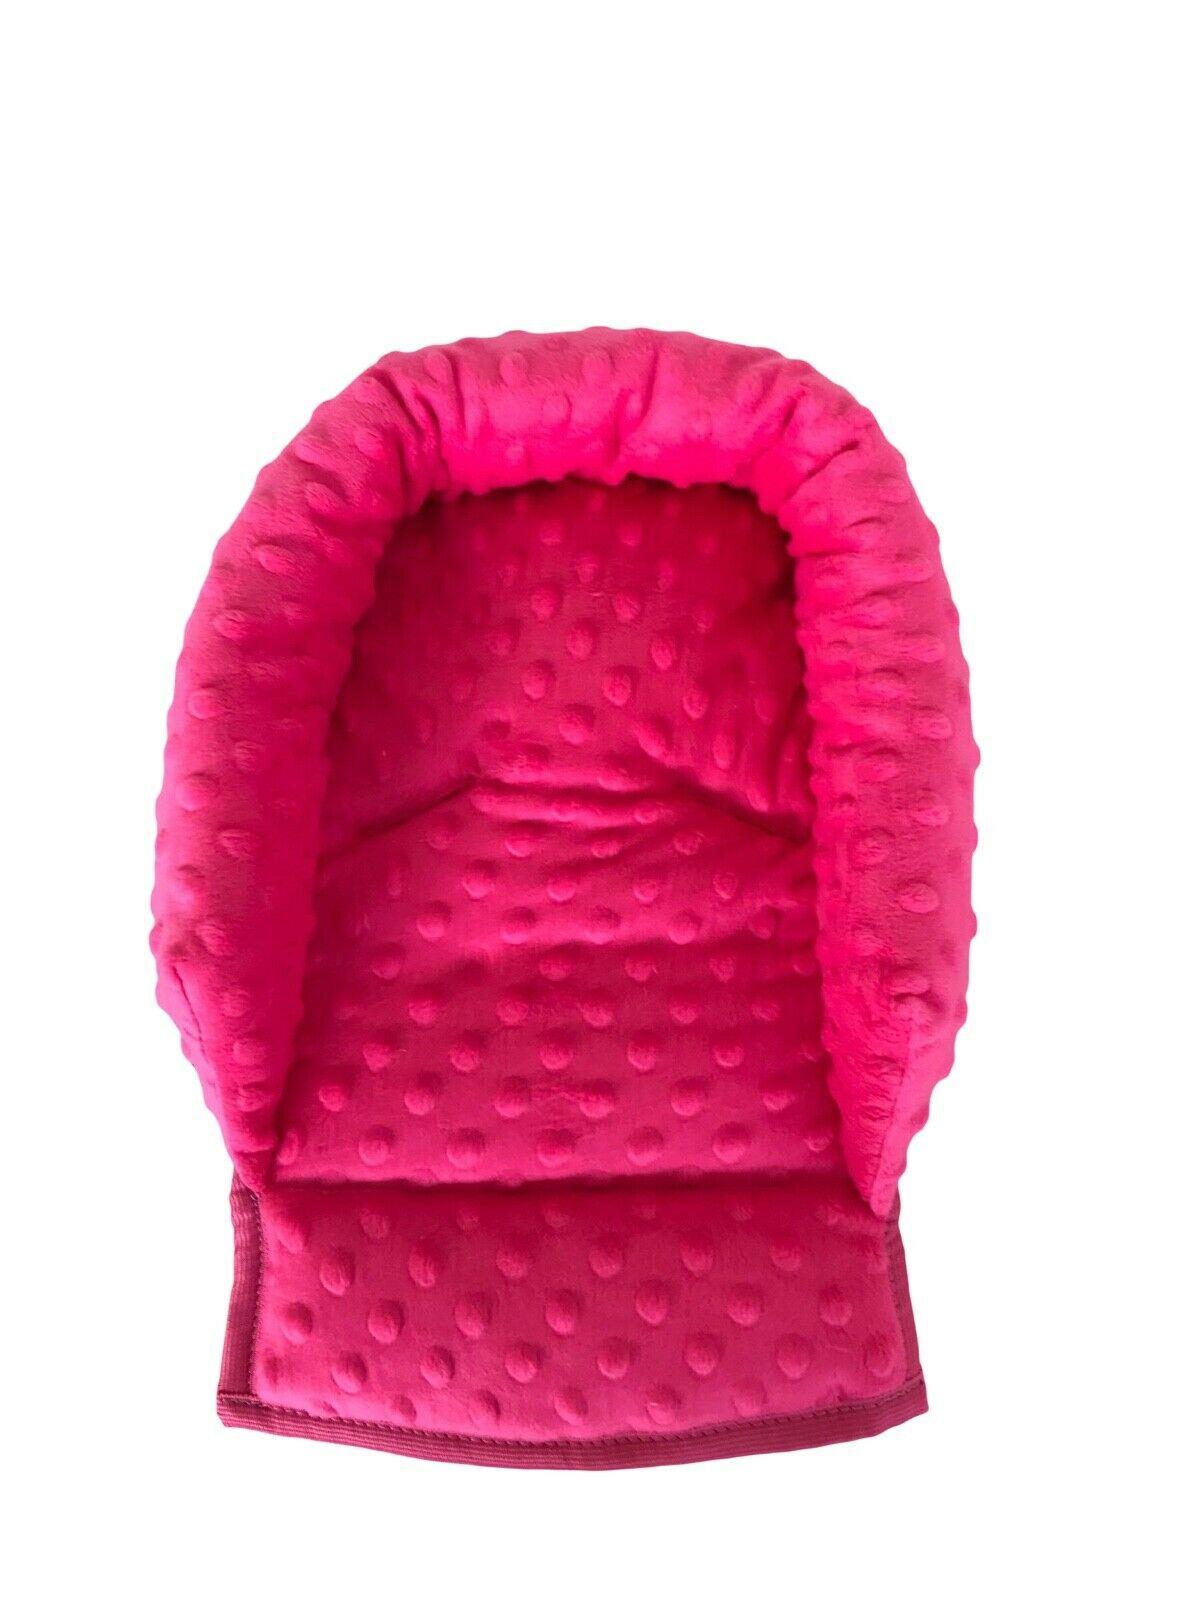 Baby Head Car Seat Rest Cushion Toddler Child Support Pillow Dimple Dark Pink